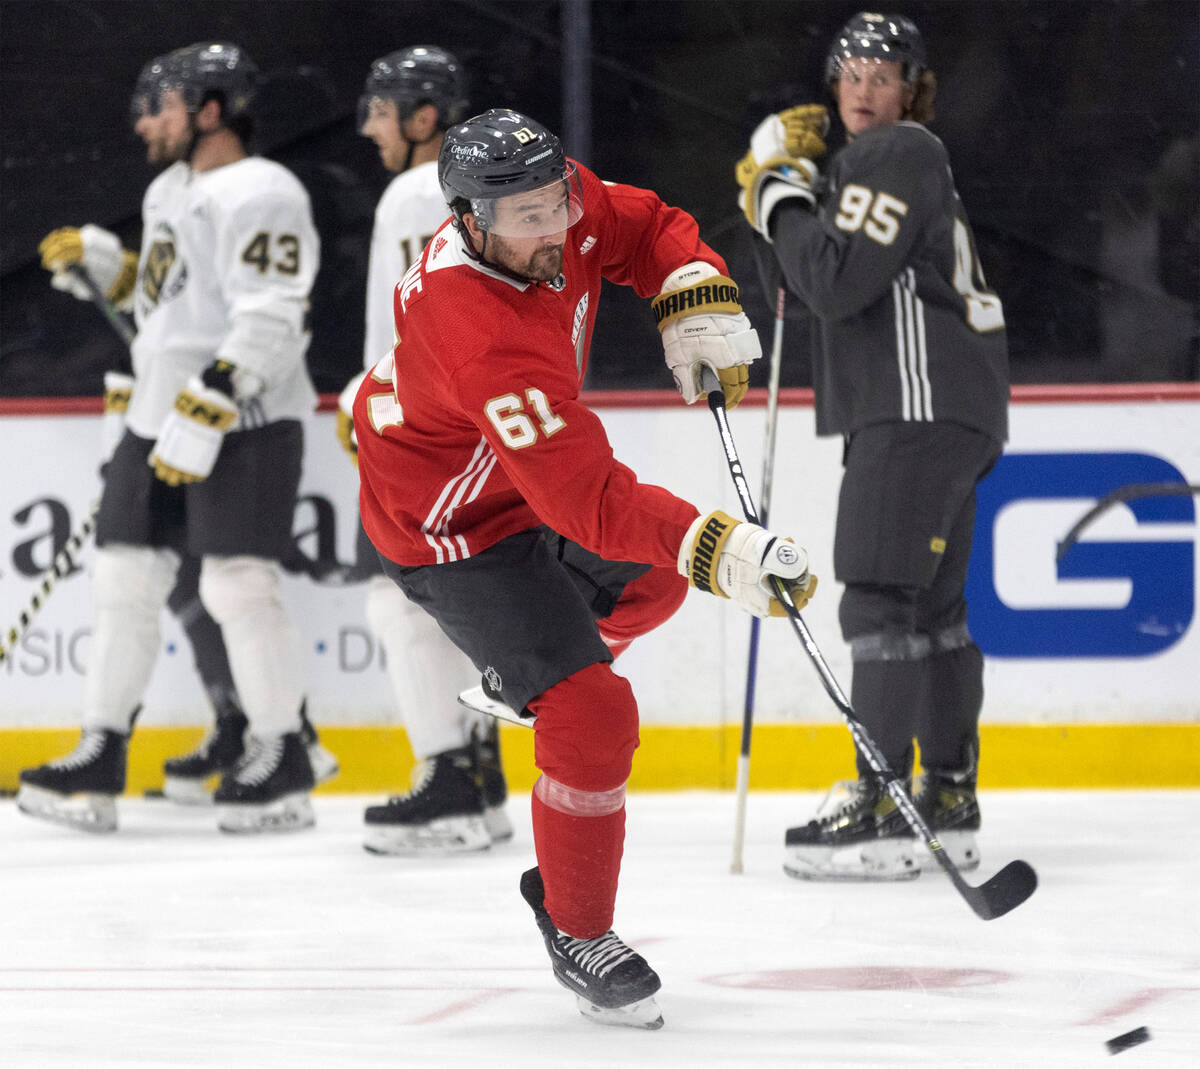 Vegas captain Stone 'excited' with progress after back surgeries